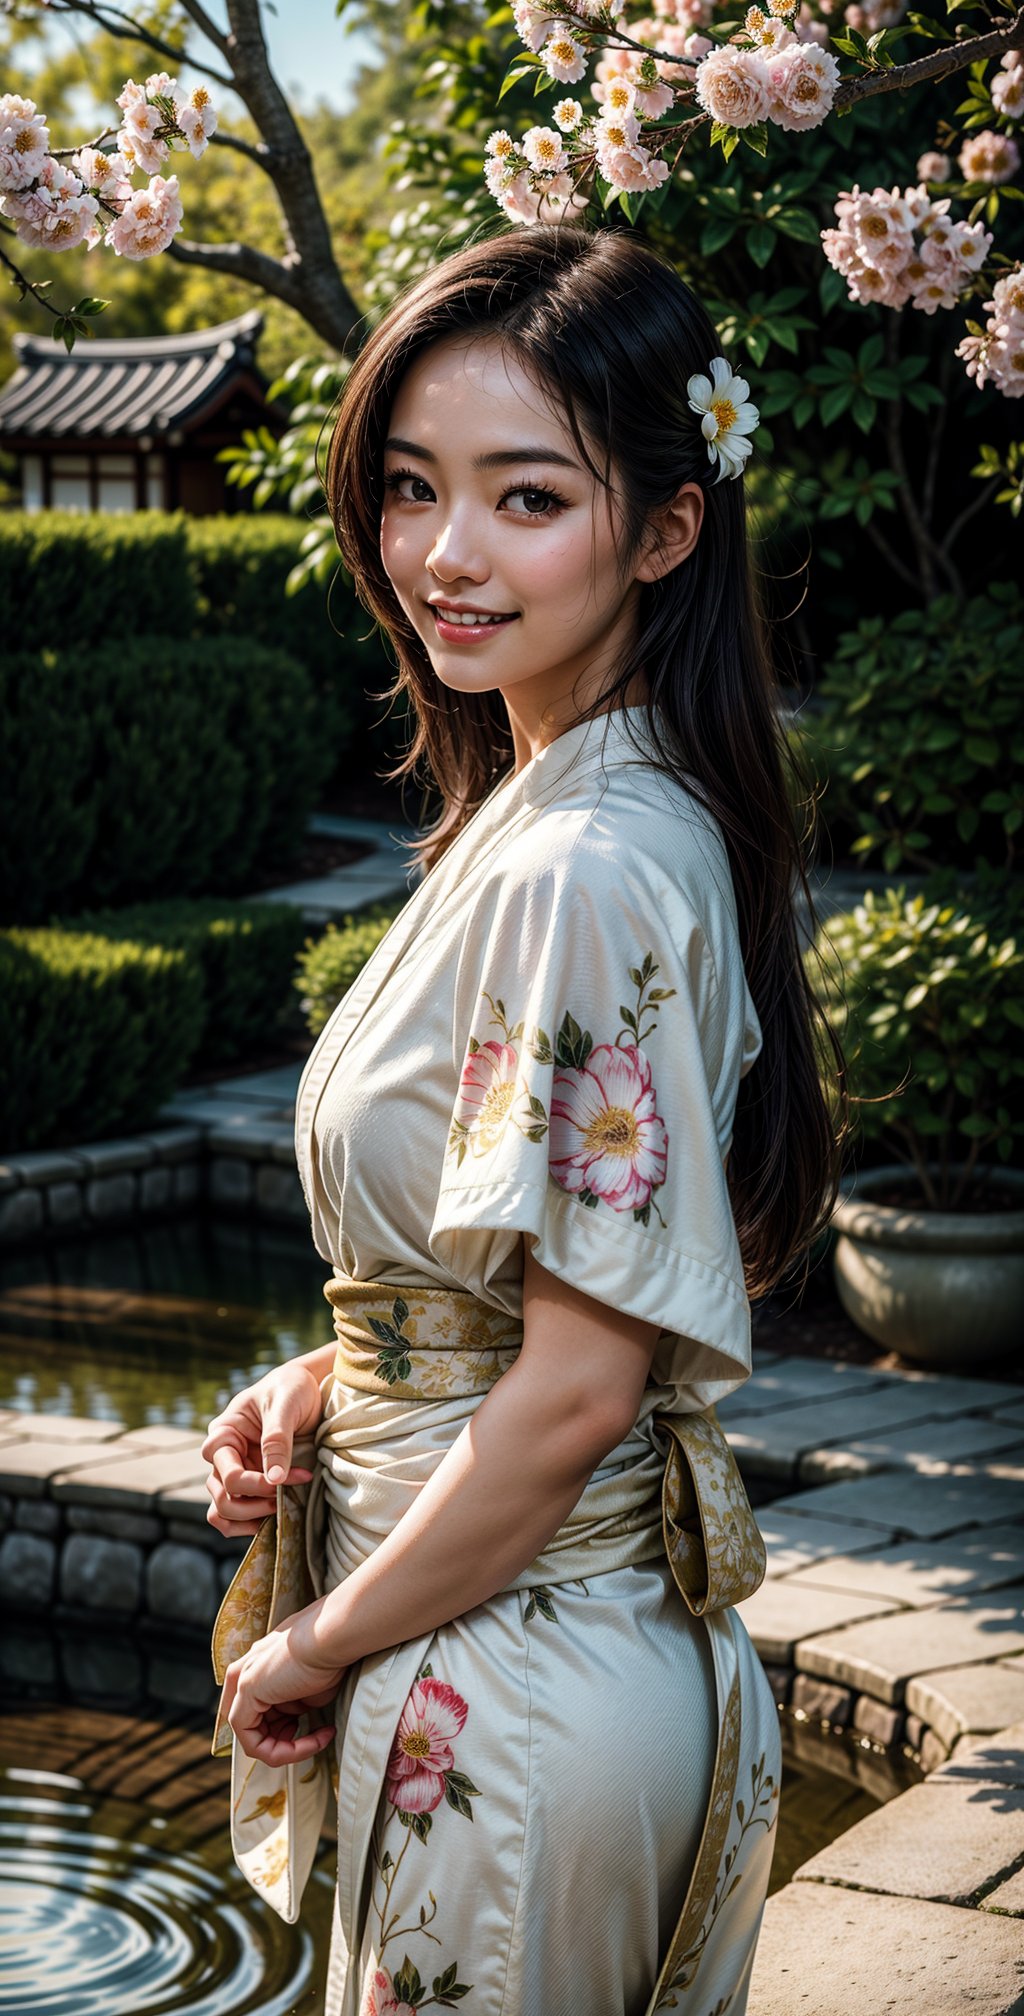 "Craft an image of a stunning Japanese woman with fair white skin, her beautiful eyes shining brightly, and a heartwarming smile. She should be dressed in a white kimono adorned with flower prints, gracefully tending to a garden as she waters the flowers, her long hair adding to the serene scene." (Photographic realistic masterpiece HDR high quality image) ,1 women,,,